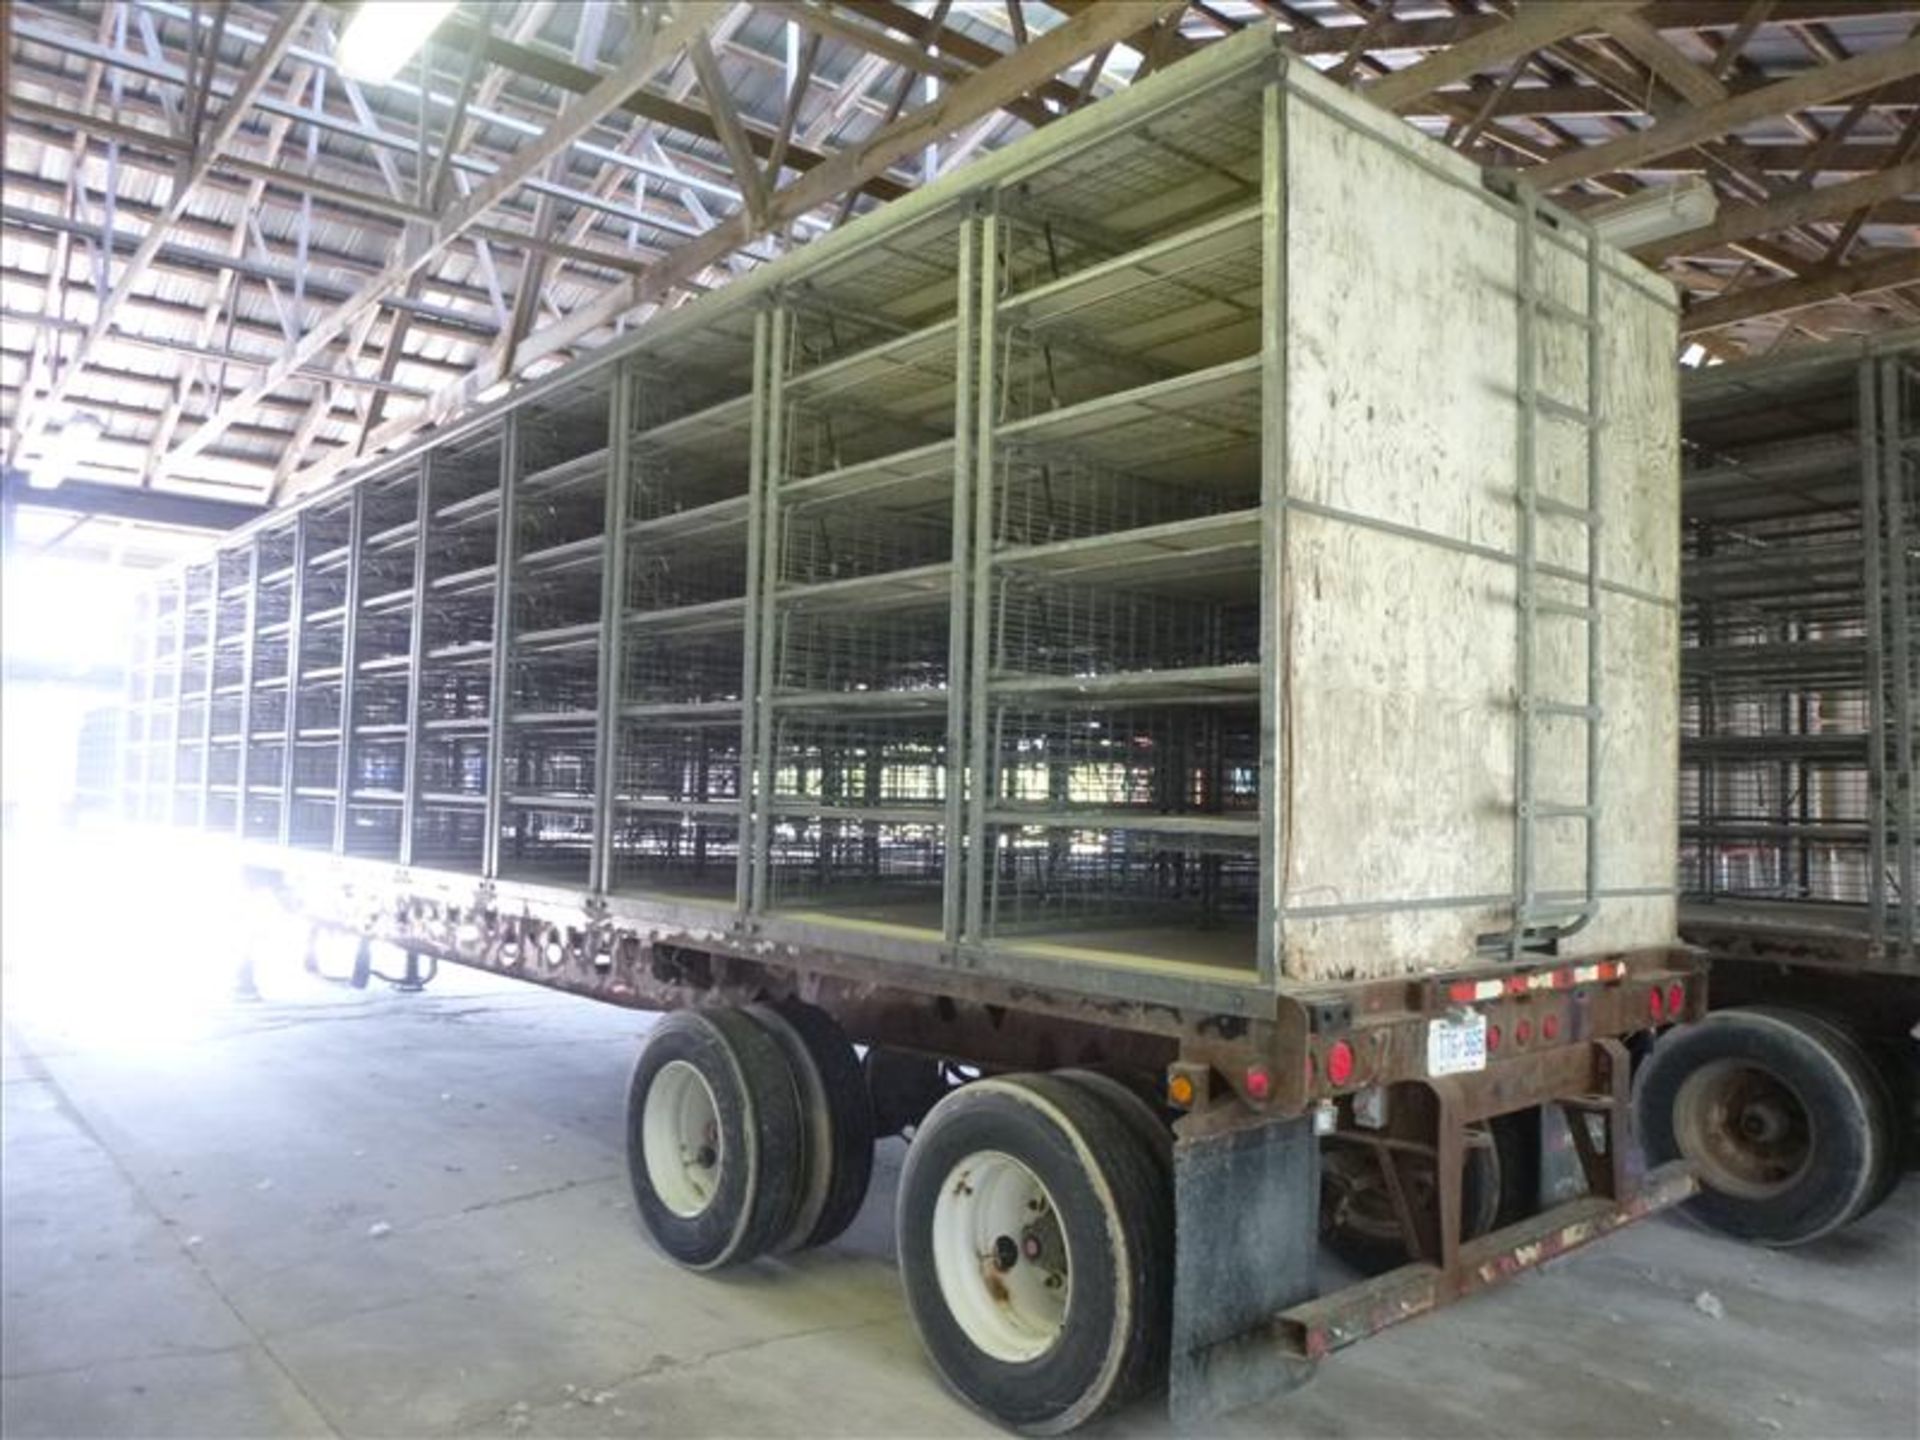 Manac 48 ft tandem axle flat-bed trailer c/w turkey cages, & side curtains (Unit #77), VIN - Image 2 of 4